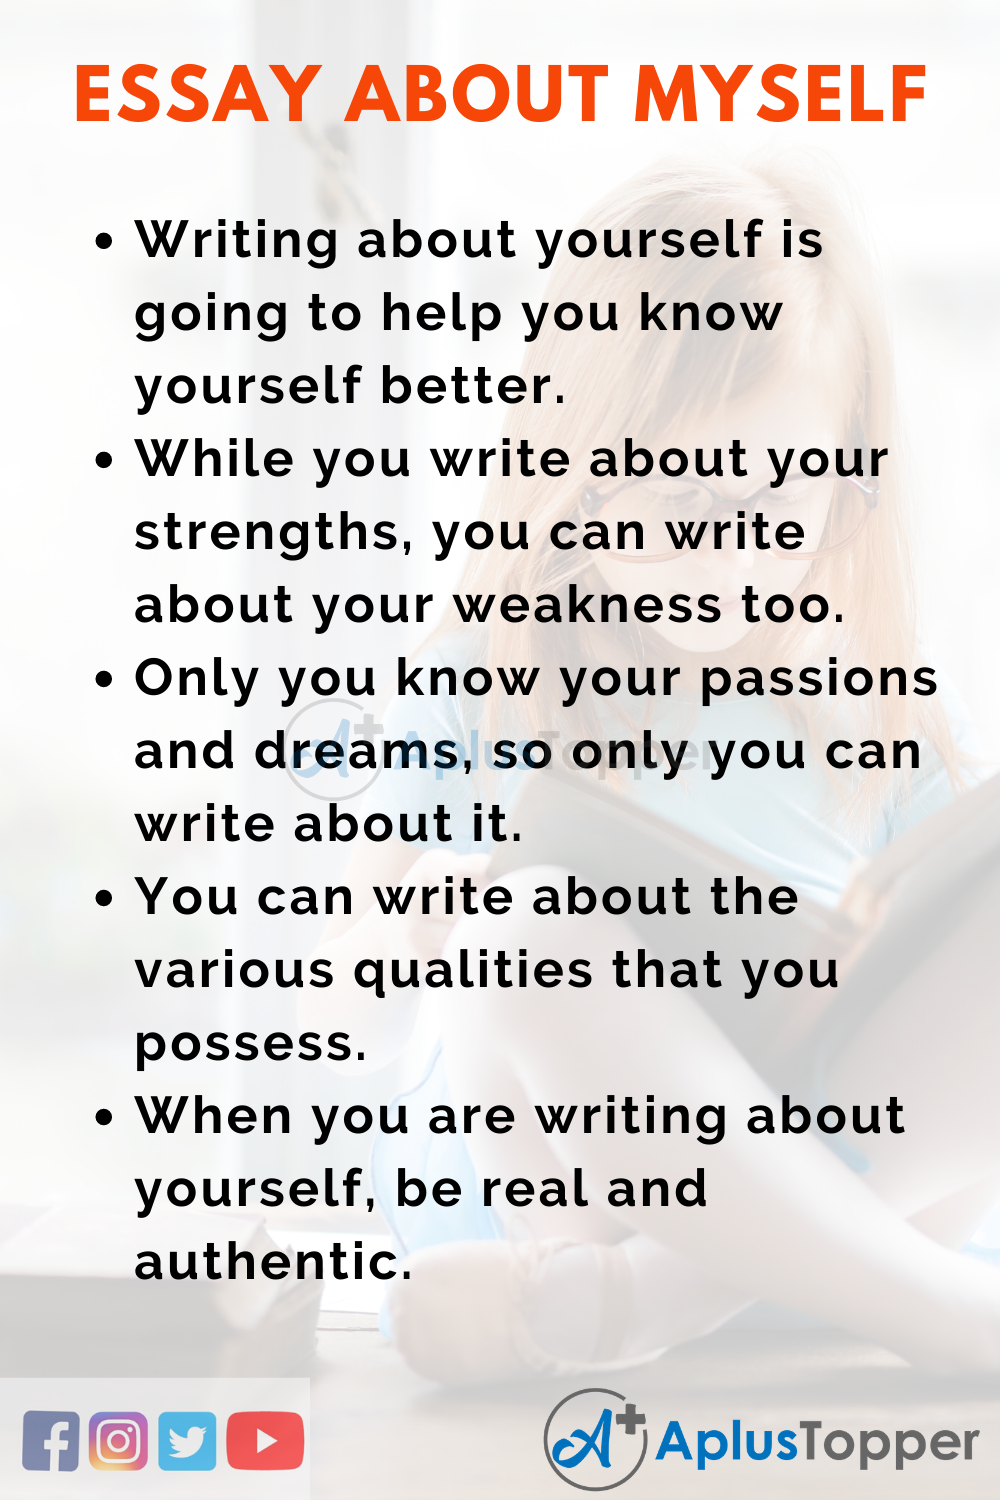 how to write and essay about yourself